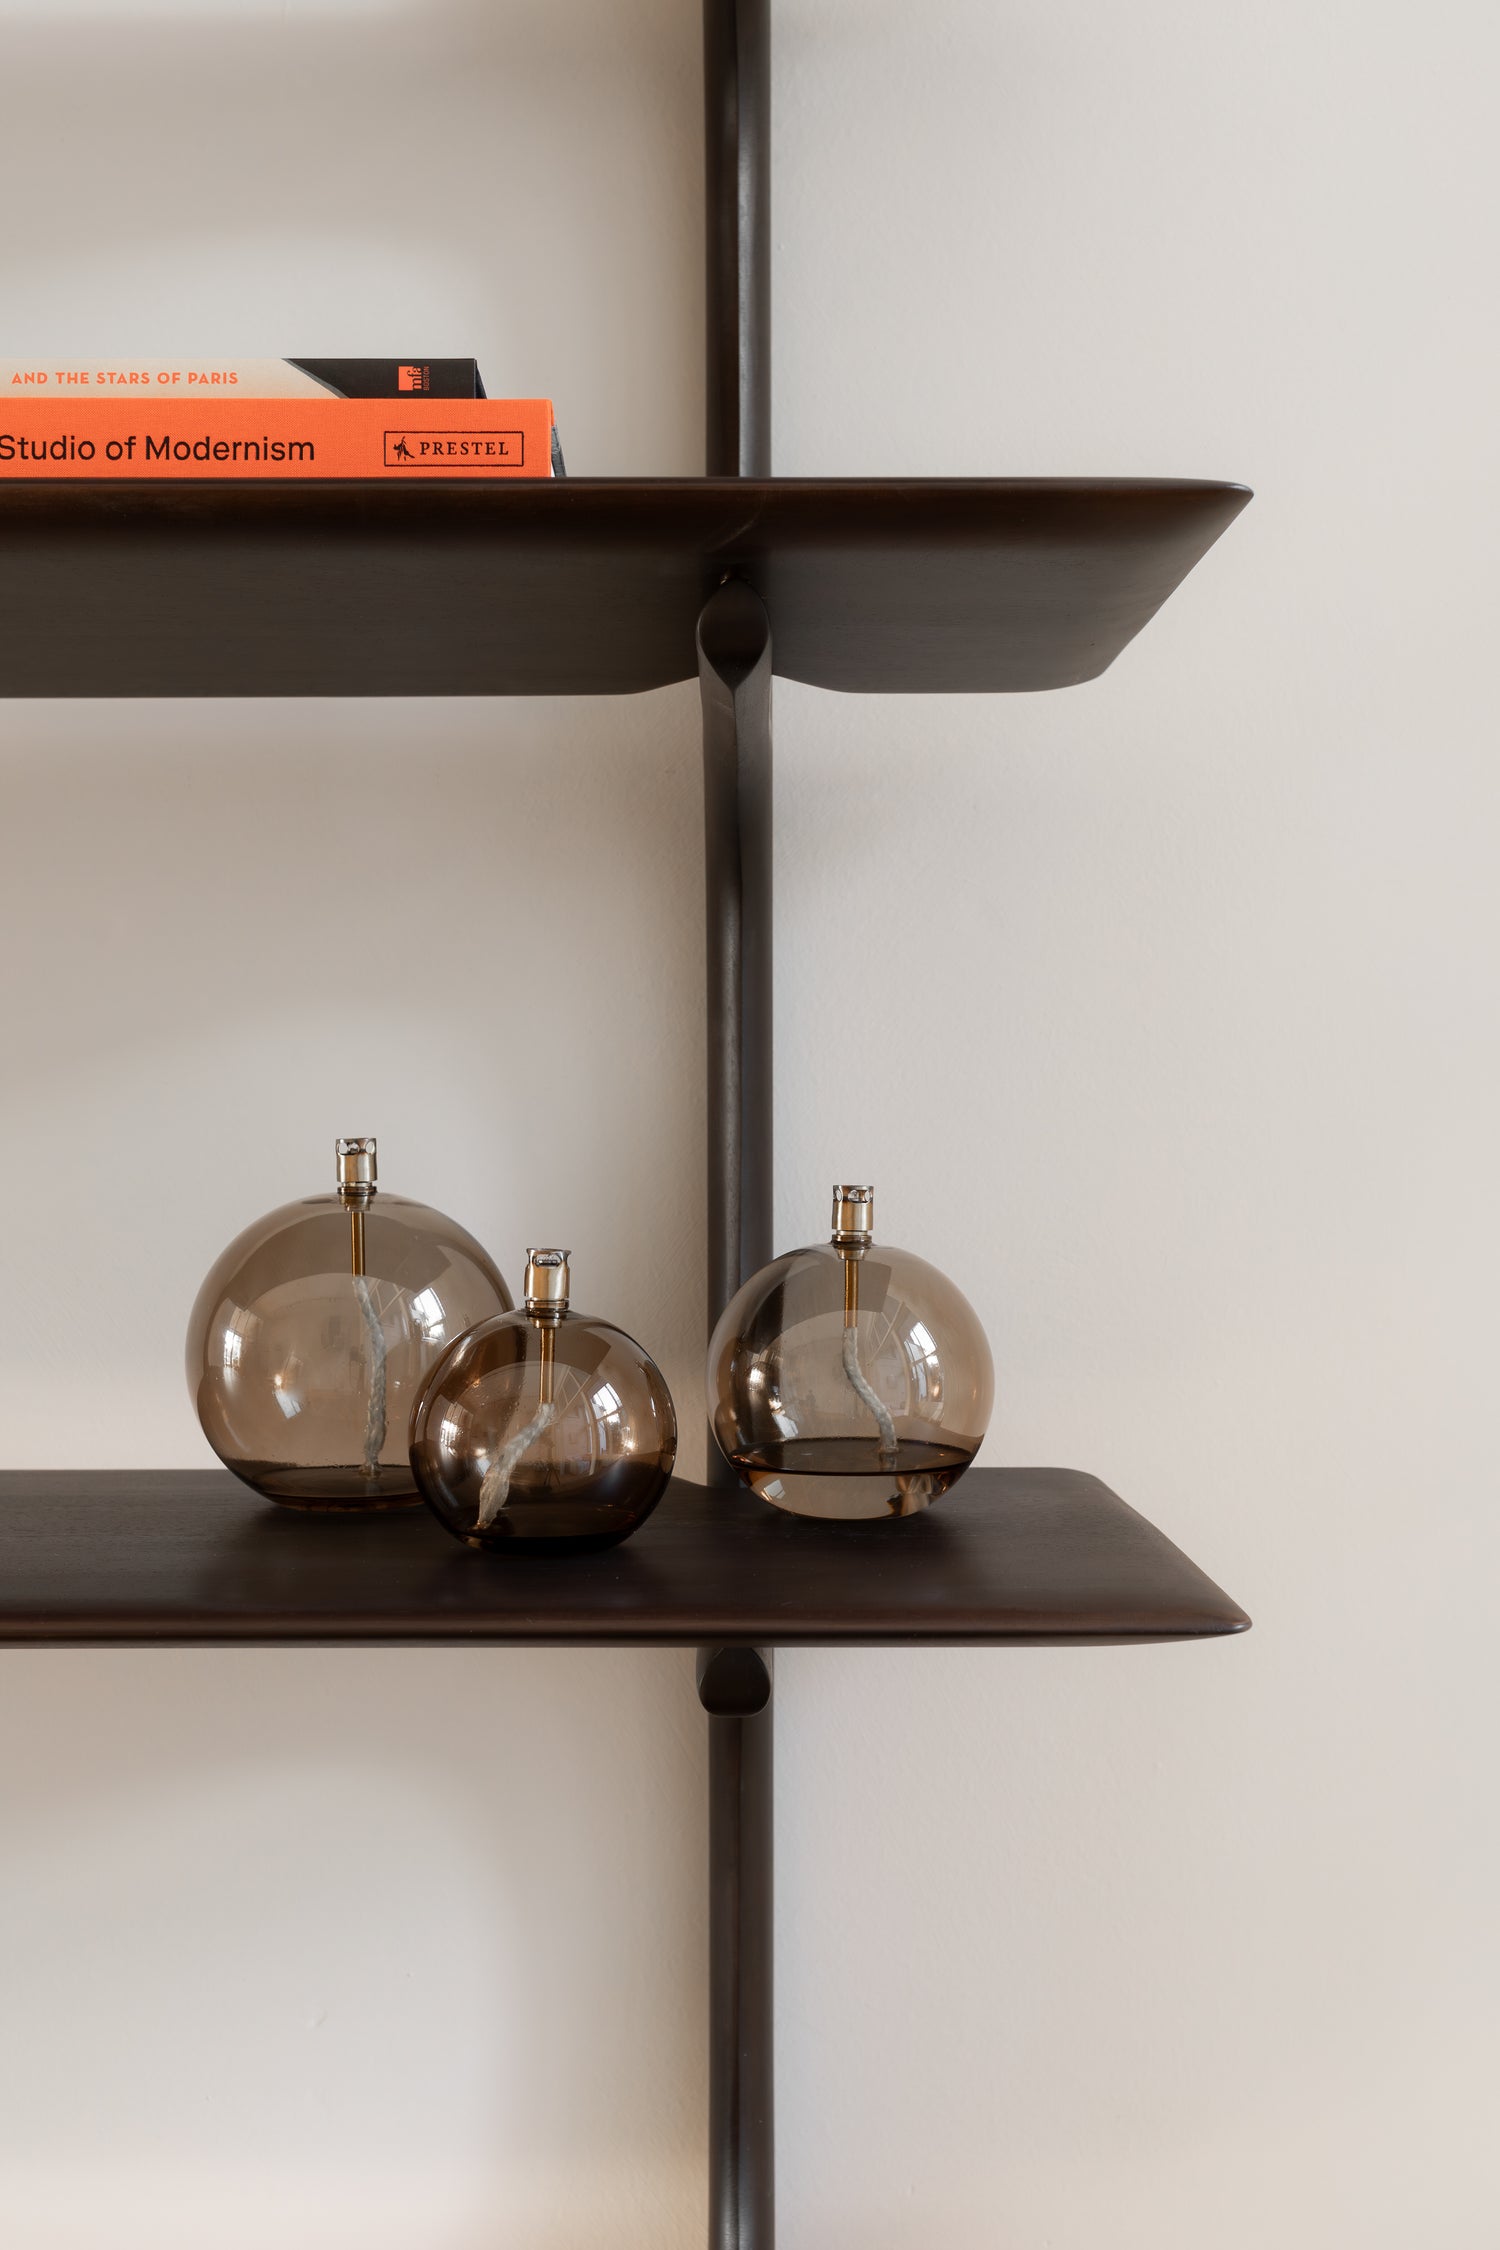 PI Wall Shelf 5 Dark Brown by Ethnicraft with decoration details